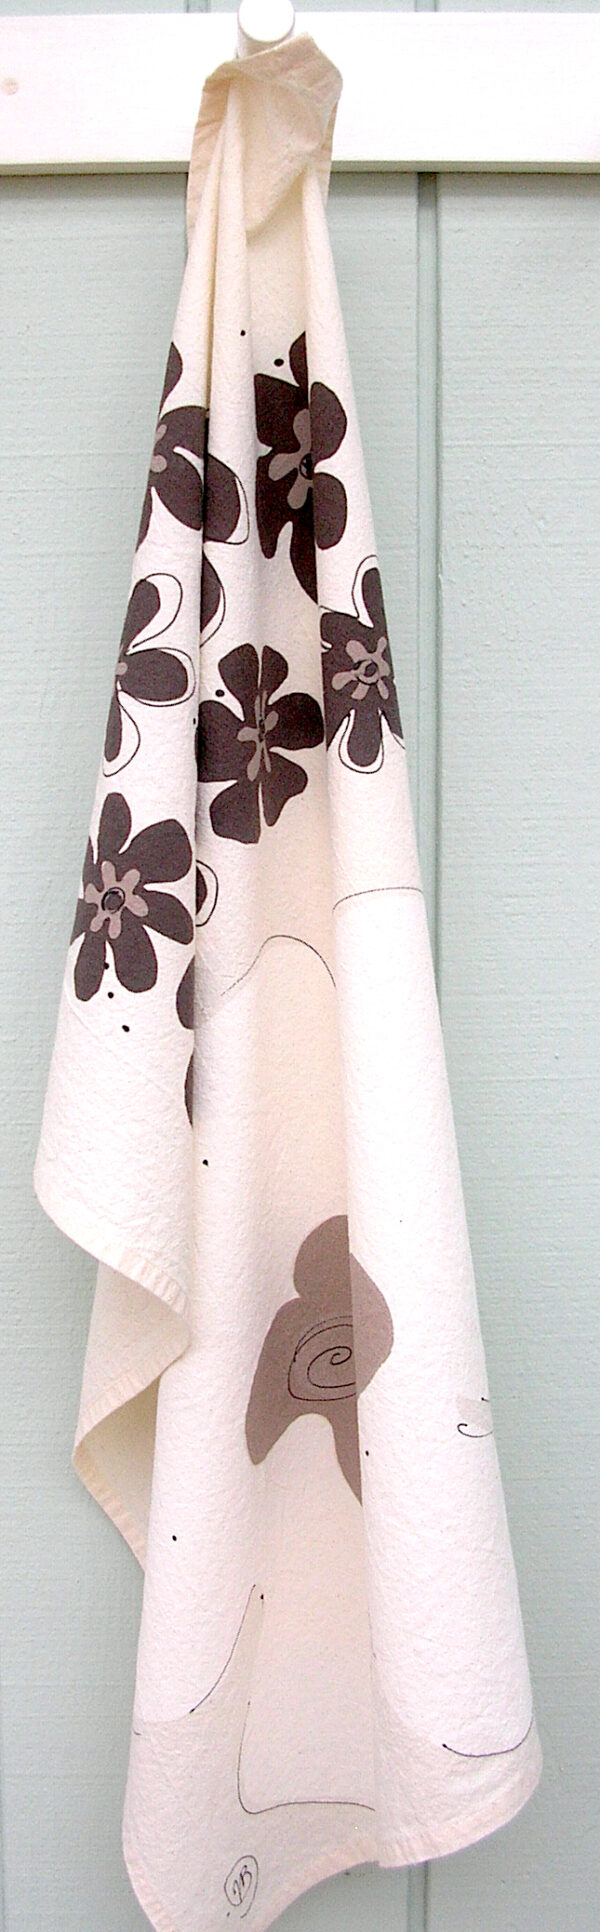 Coffee Cream kitchen towel on a natural background.